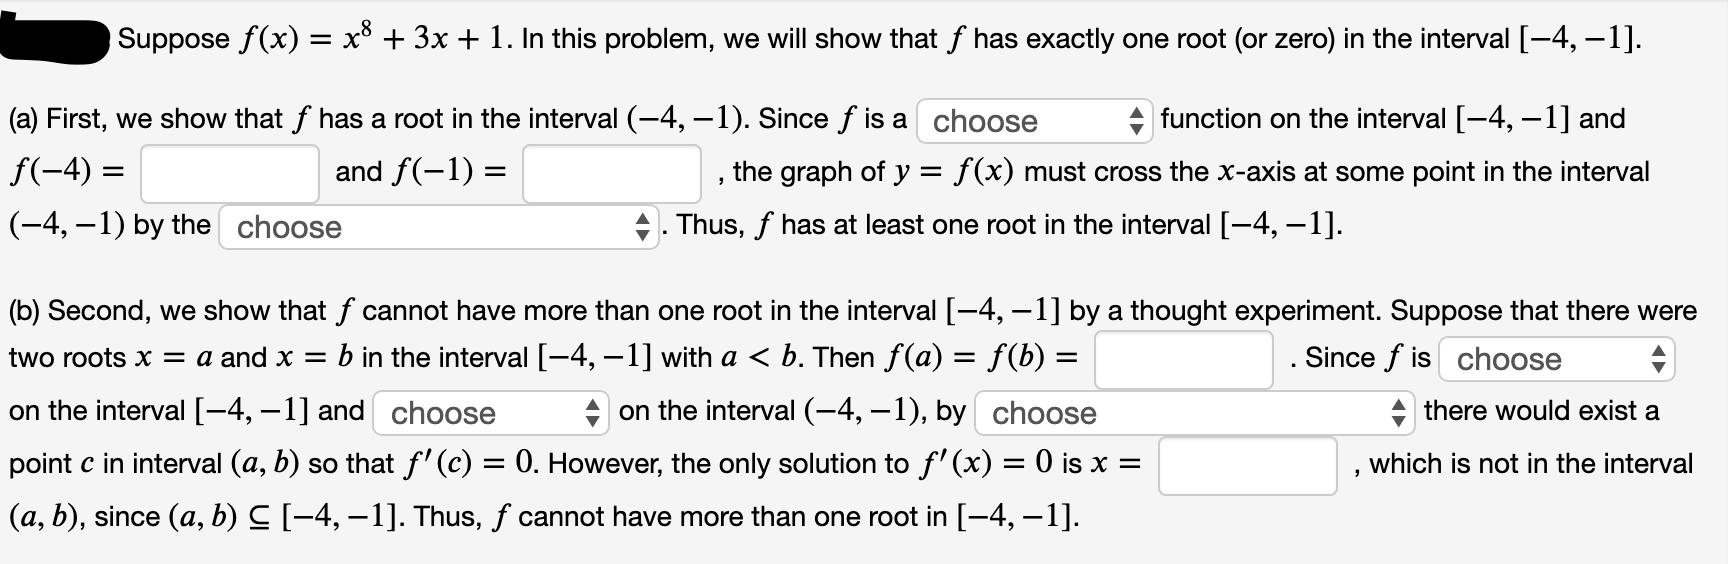 Suppose f(x) = x* + 3x + 1. In this problem, we will show that f has exactly one root (or zero) in the interval [-4, –1].
%3D
(a) First, we show that f has a root in the interval (-4, –1). Since f is a choose
function on the interval [-4, –1] and
the graph of y = f(x) must cross the x-axis at some point in the interval
. Thus, f has at least one root in the interval [-4, –1].
f(-4) =
and f(-1) =
(-4, –1) by the choose
(b) Second, we show that f cannot have more than one root in the interval [-4, –1] by a thought experiment. Suppose that there were
two roots x = a and x = b in the interval [-4, –1] with a < b. Then f(a) = f(b) =
. Since f is choose
on the interval [-4, –1] and choose
point c in interval (a, b) so that f' (c) = 0. However, the only solution to f' (x) = 0 is x =
(a, b), since (a, b) C [-4, –1]. Thus, f cannot have more than one root in [-4, –1].
+ on the interval (-4, –1), by choose
+ there would exist a
which is not in the interval
